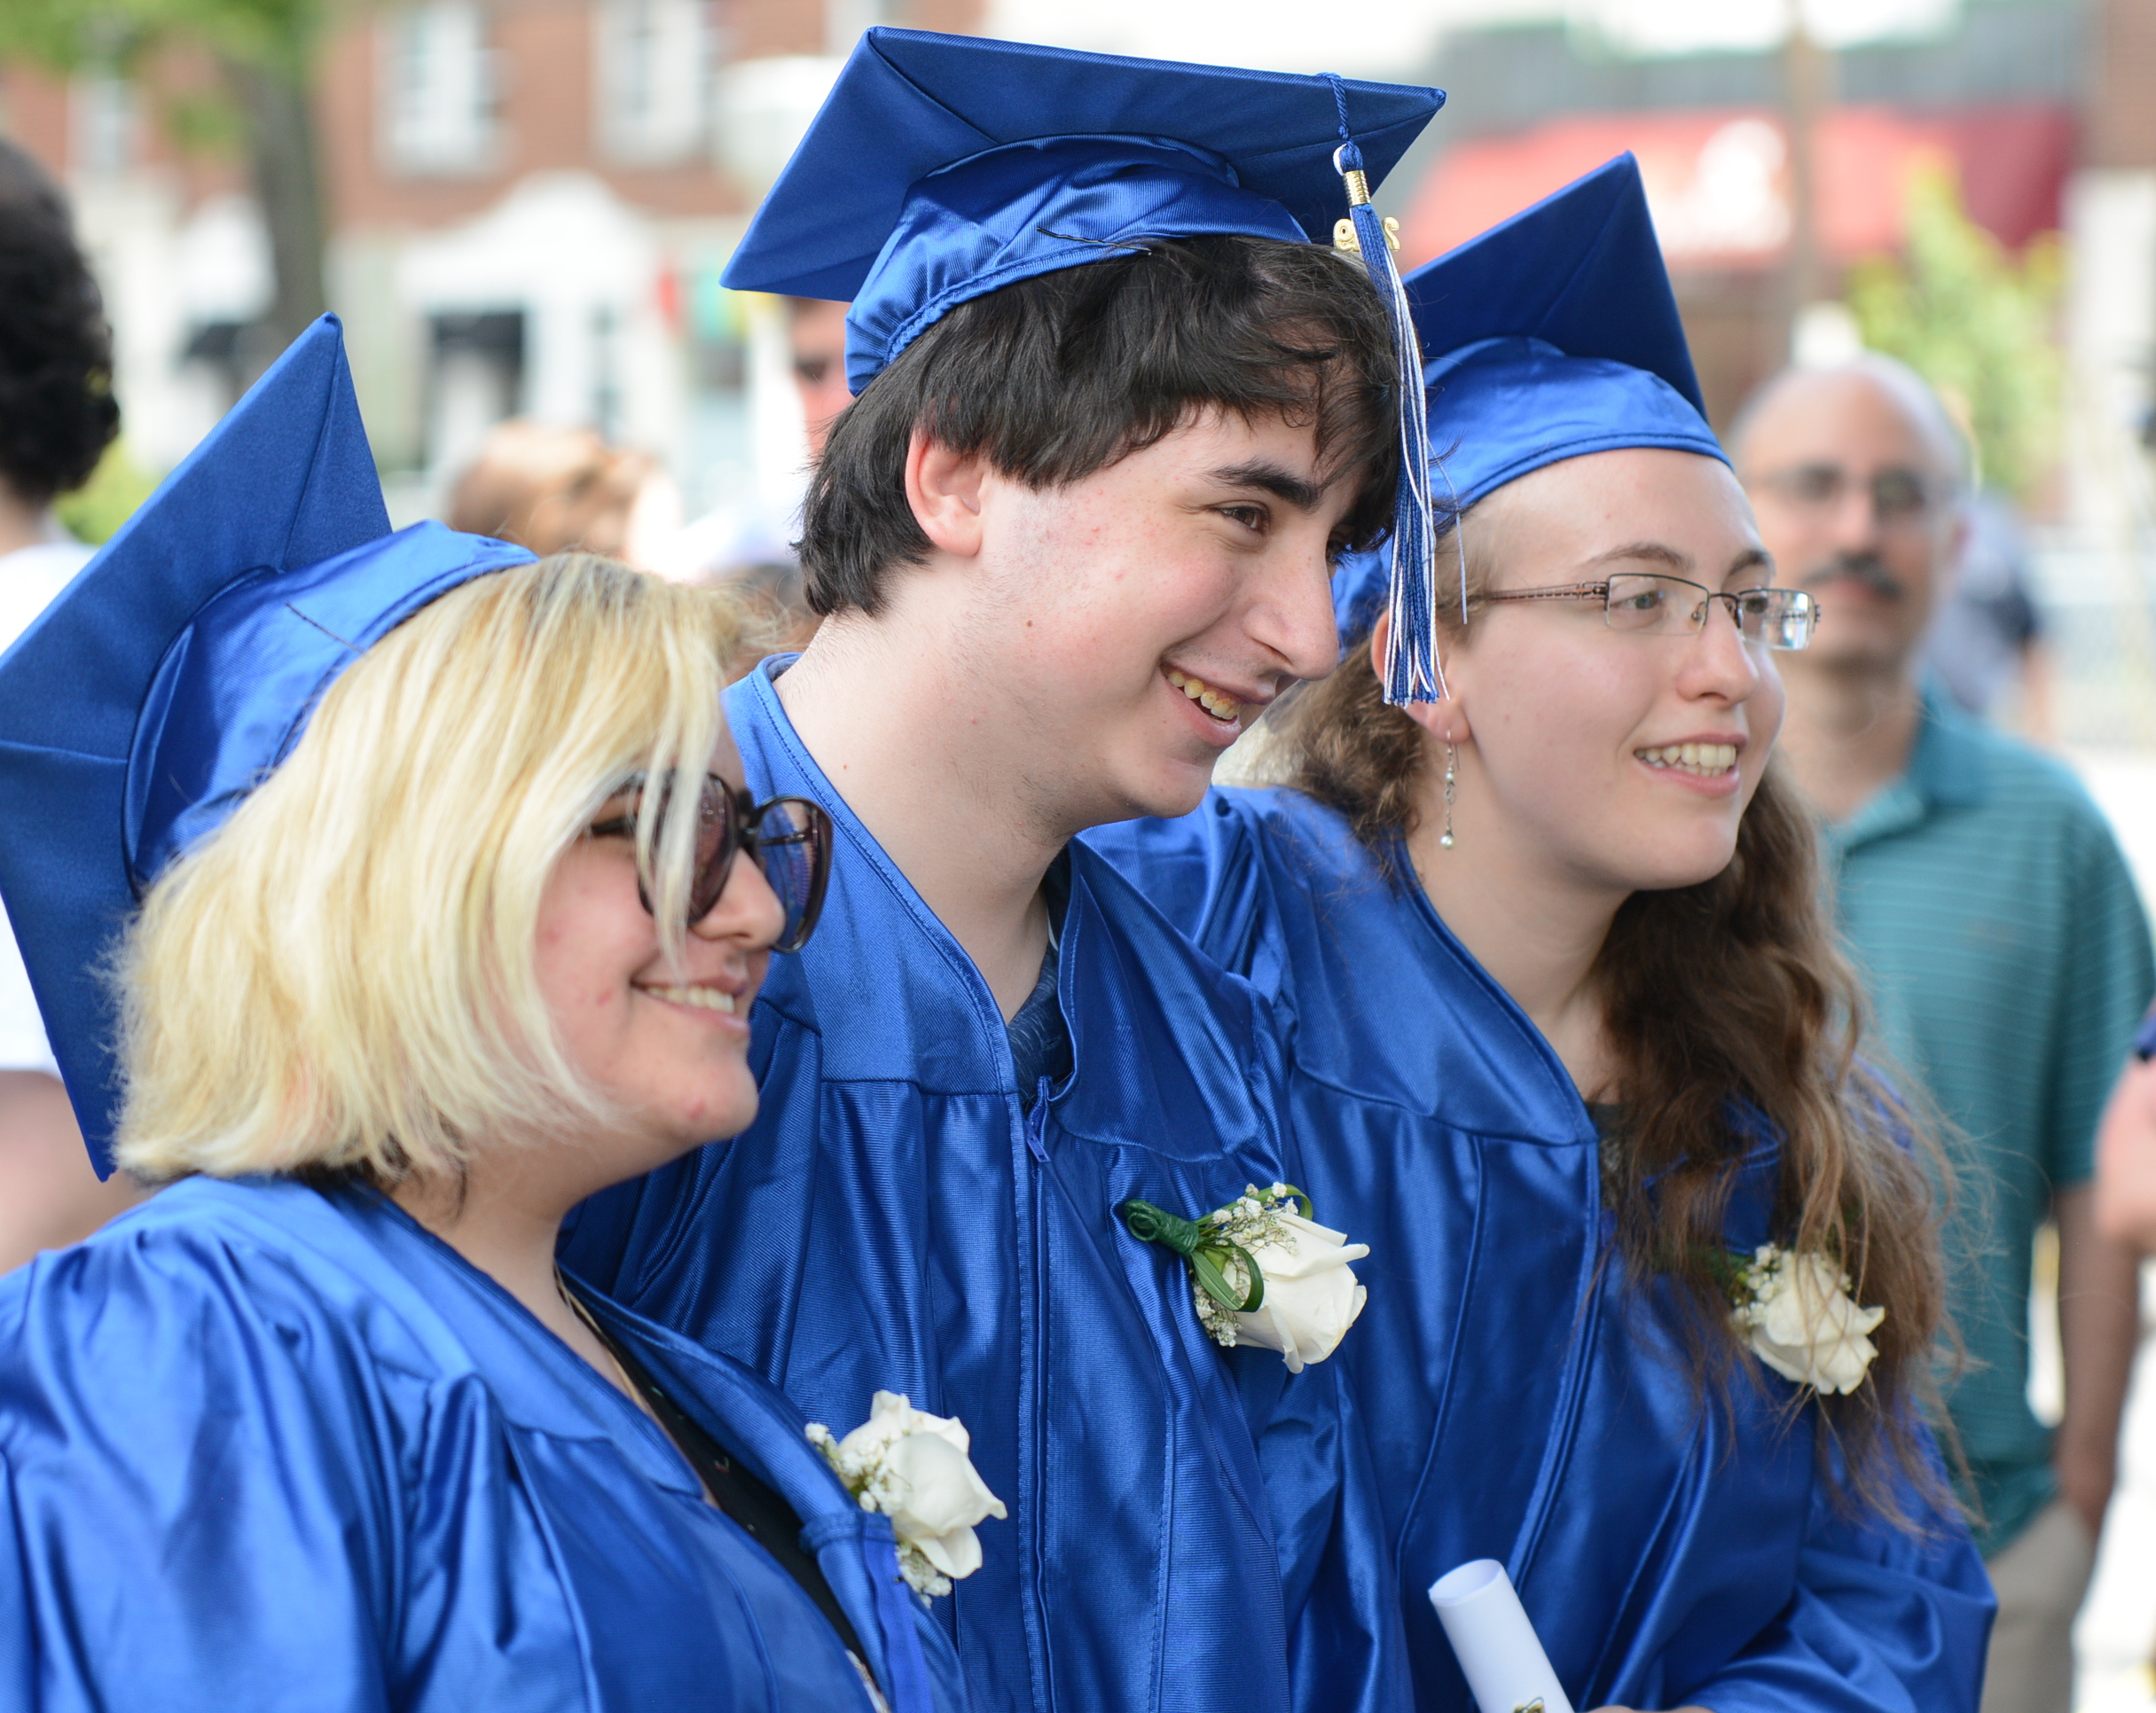 Nearly a dozen students graduated from Great Neck Village School on Monday. (Photo by Janelle Clausen)